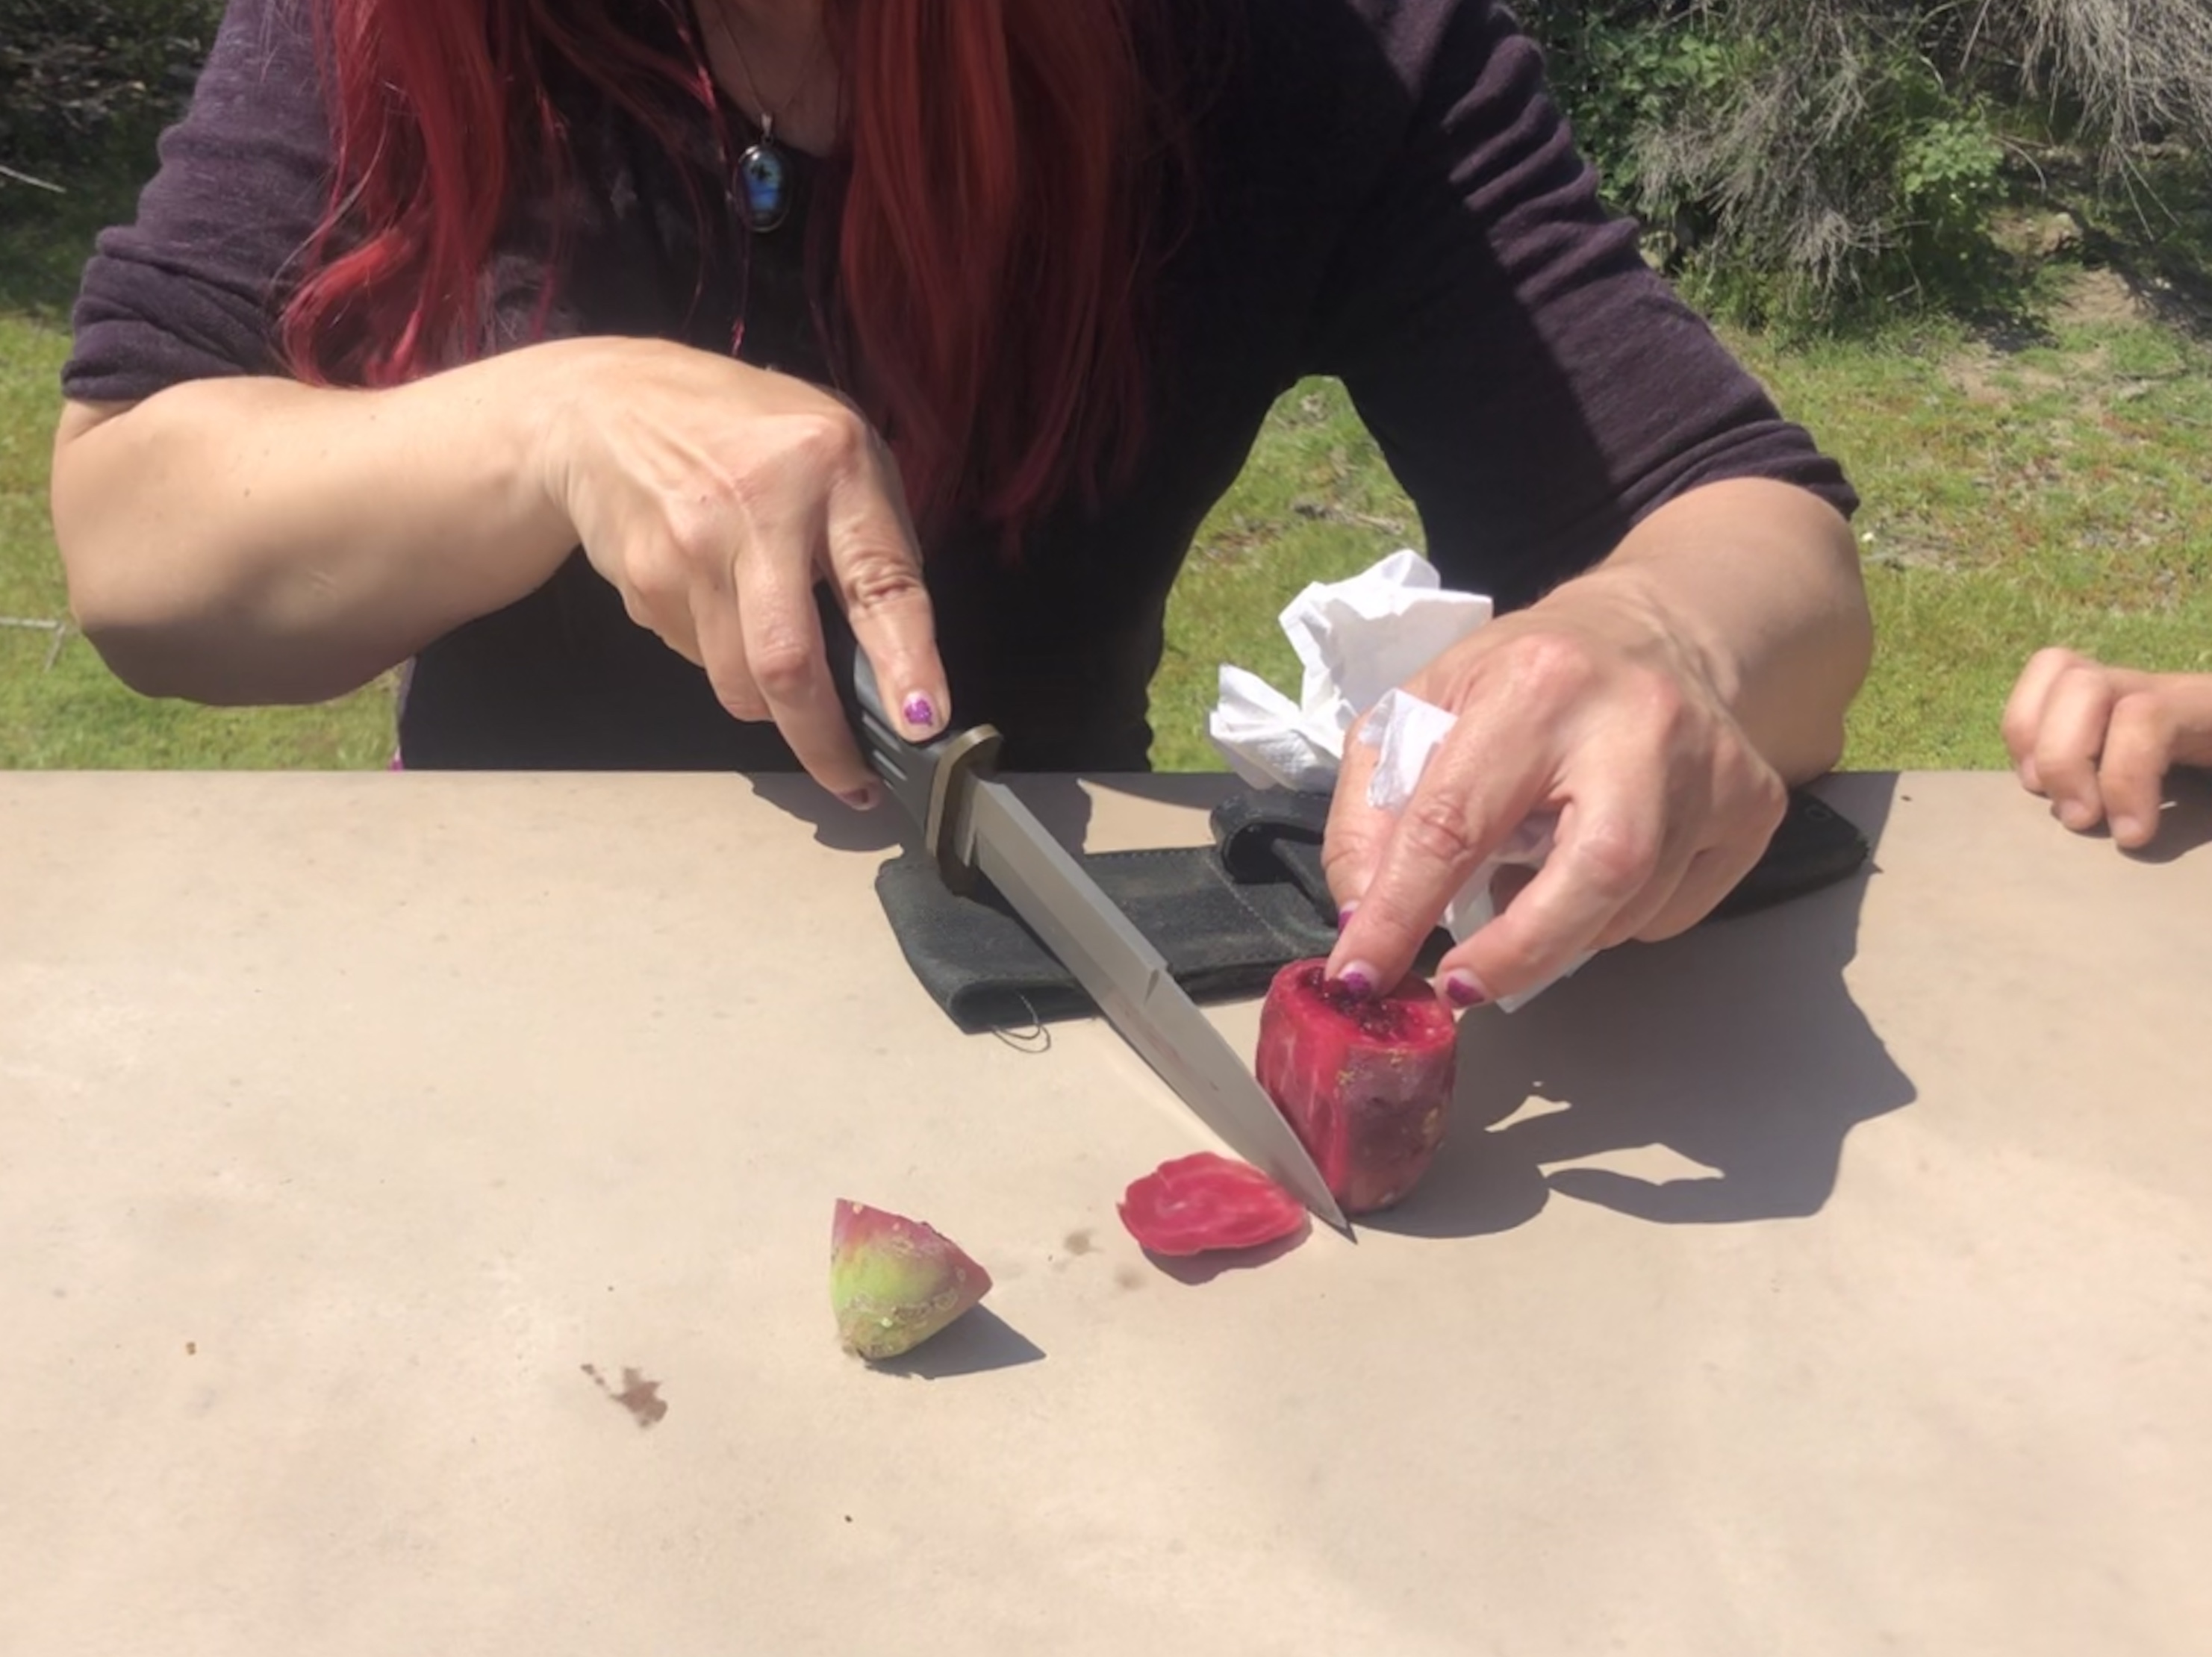 Cutting up at Prickly Pear Cactus at Casper's Wilderness Park